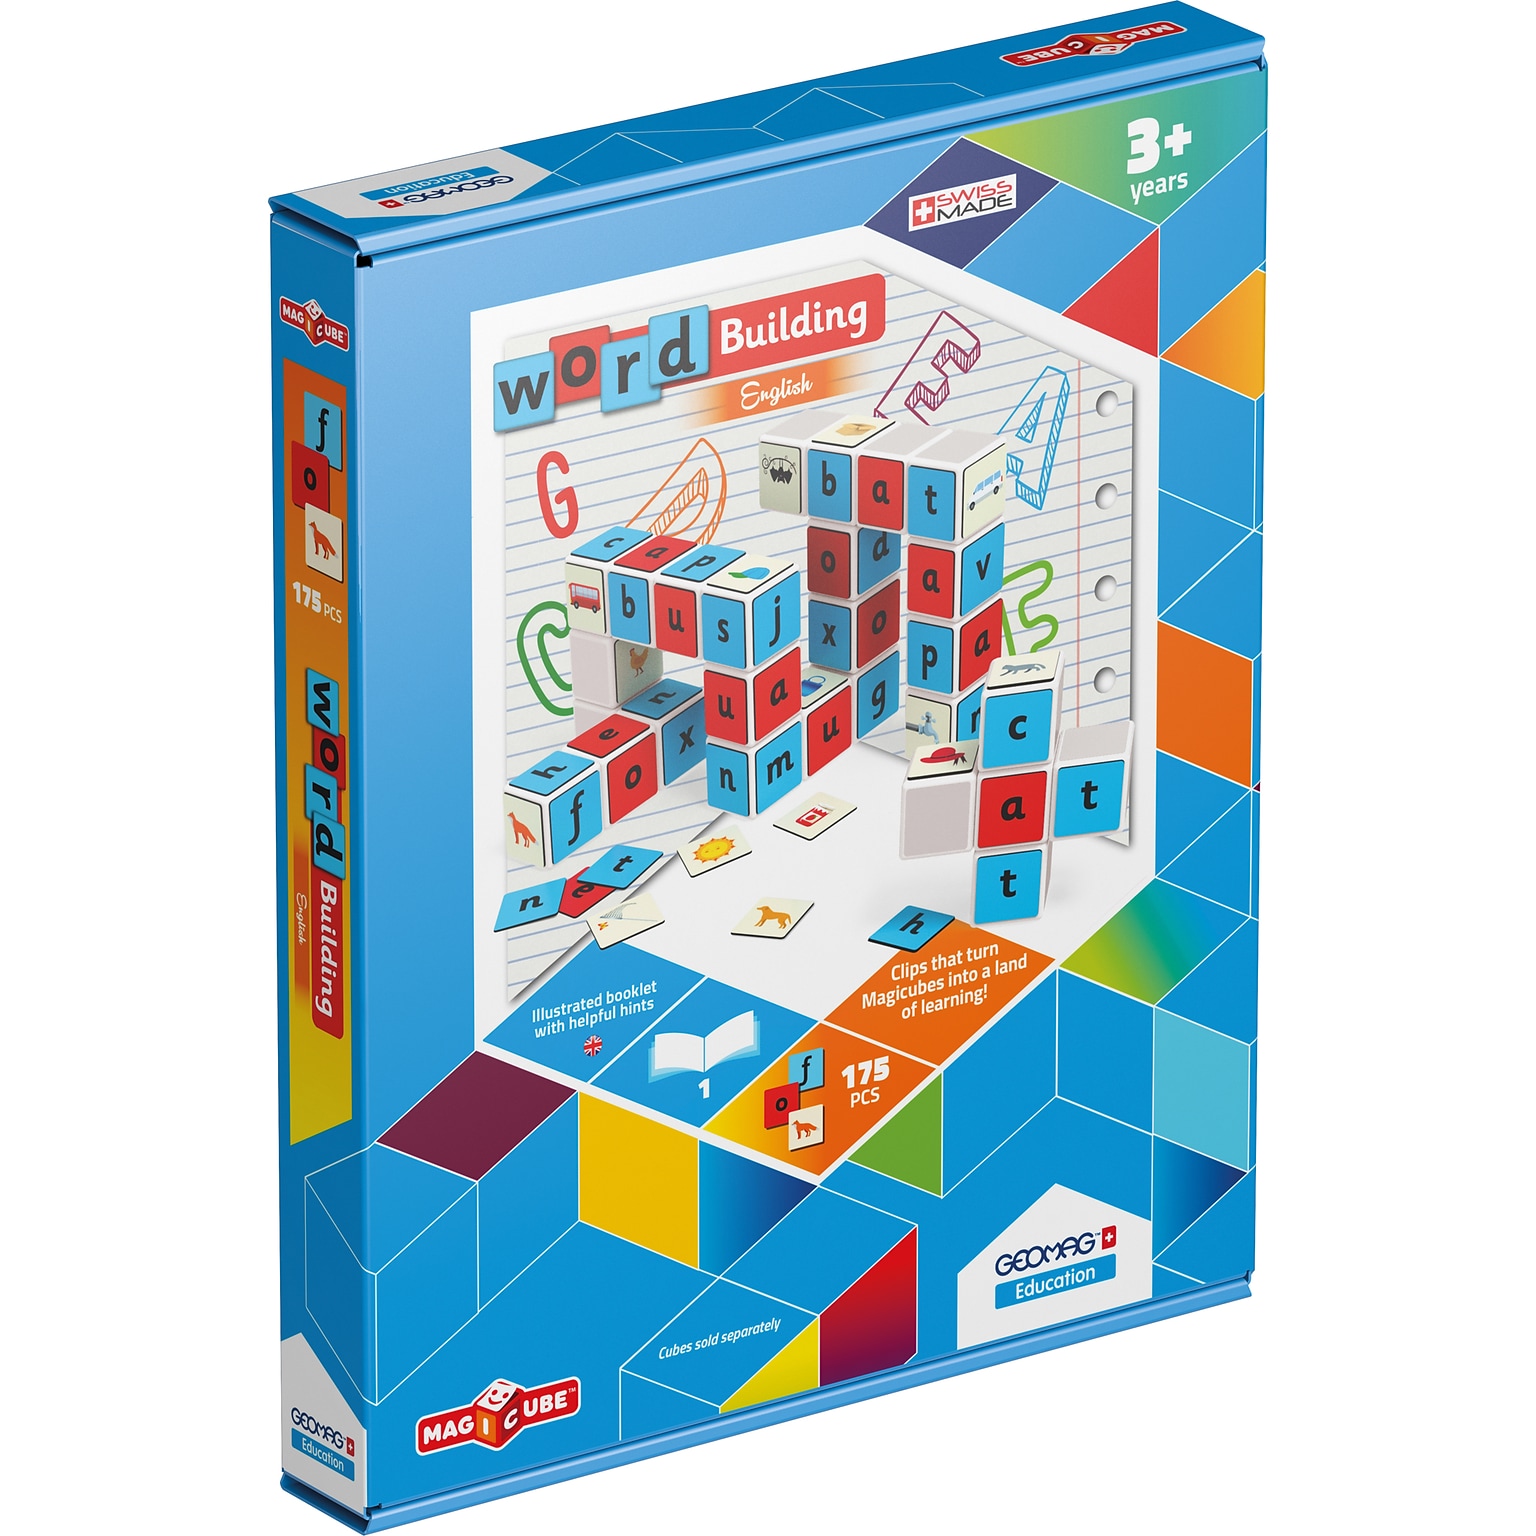 GeoMagWorld Magicube Word Building Set, 176 pieces (GMW234)